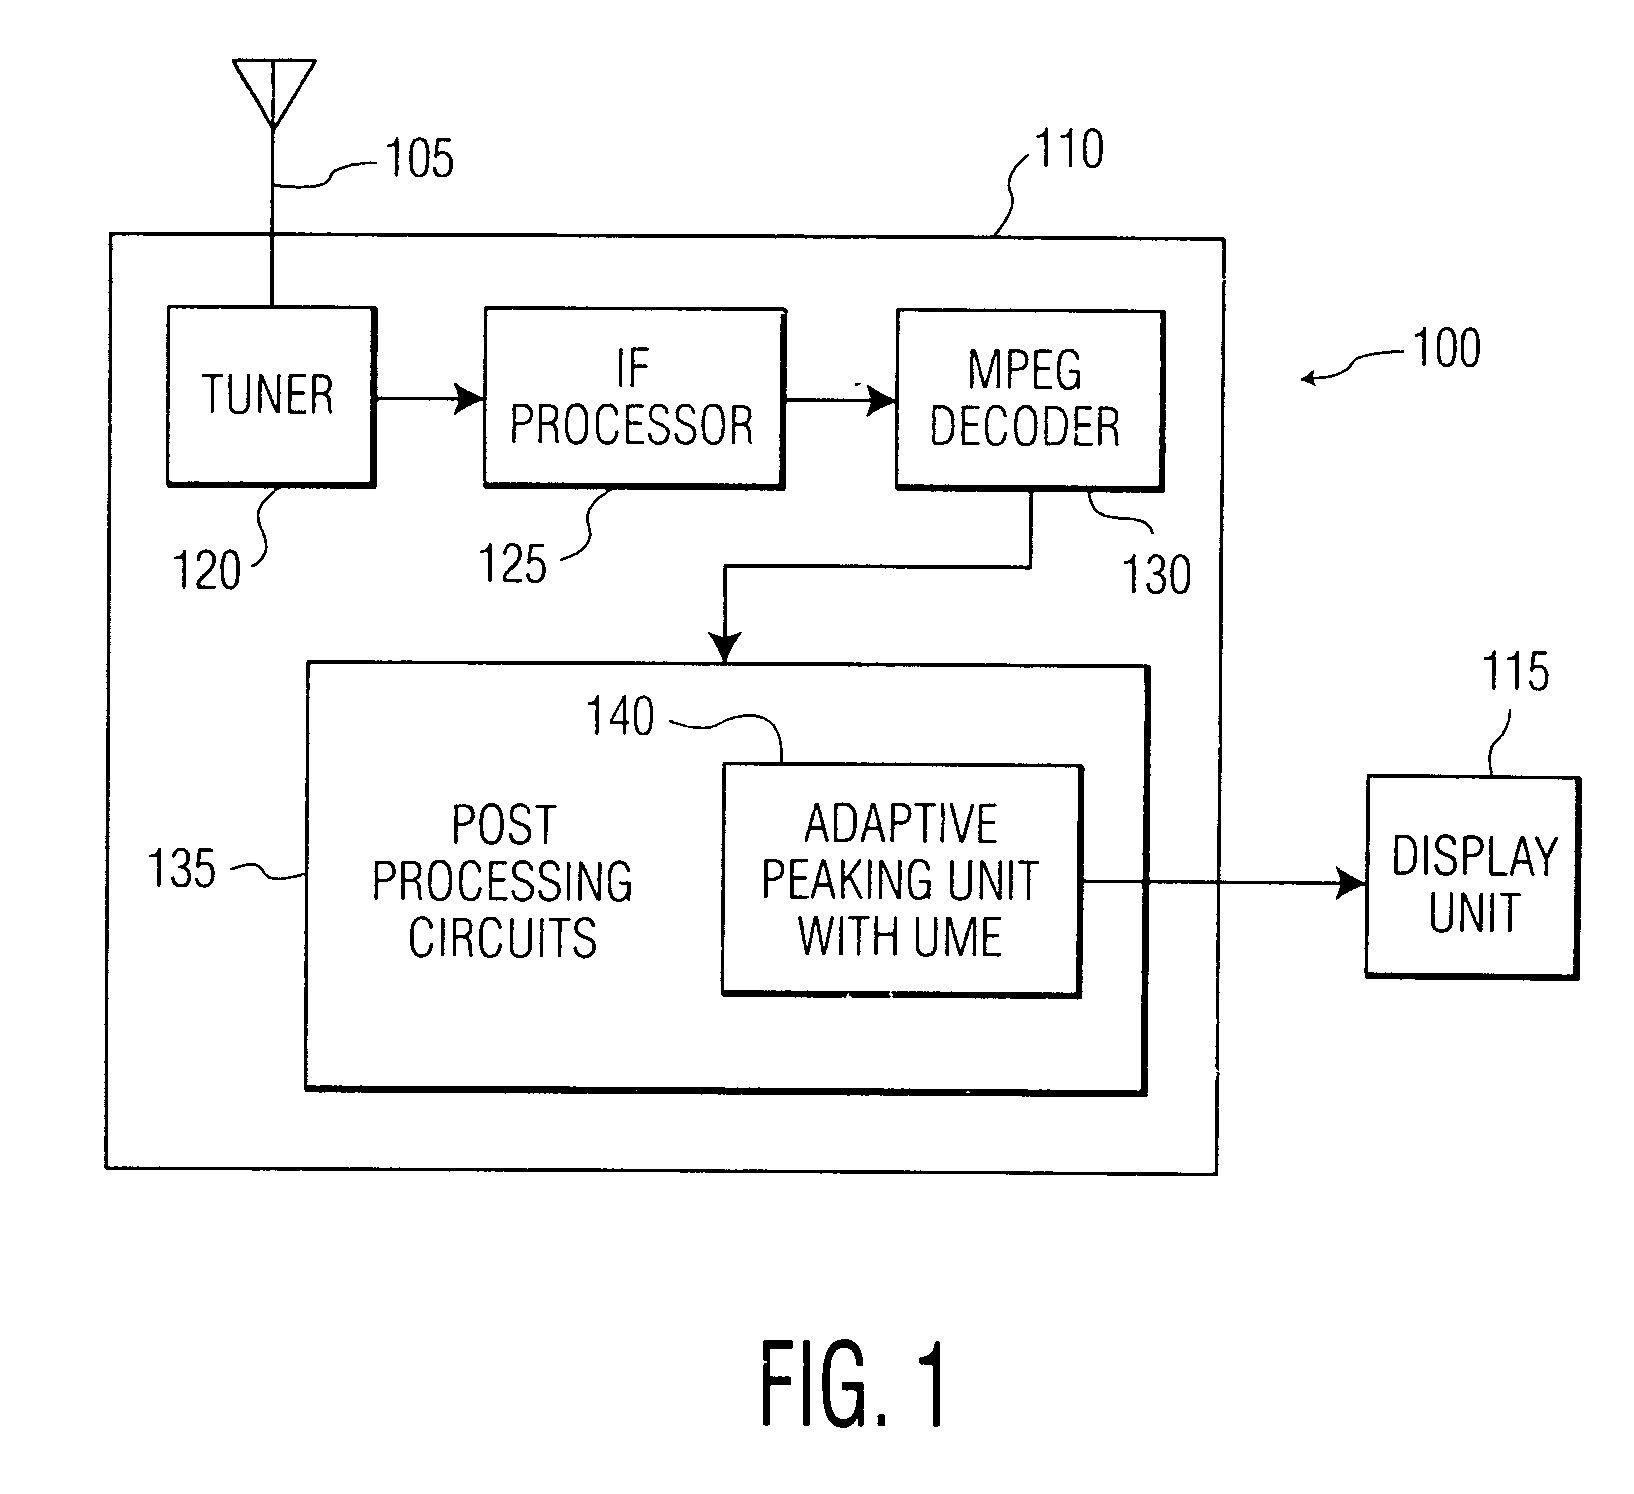 Apparatus and method for providing a usefulness metric based on coding information for video enhancement